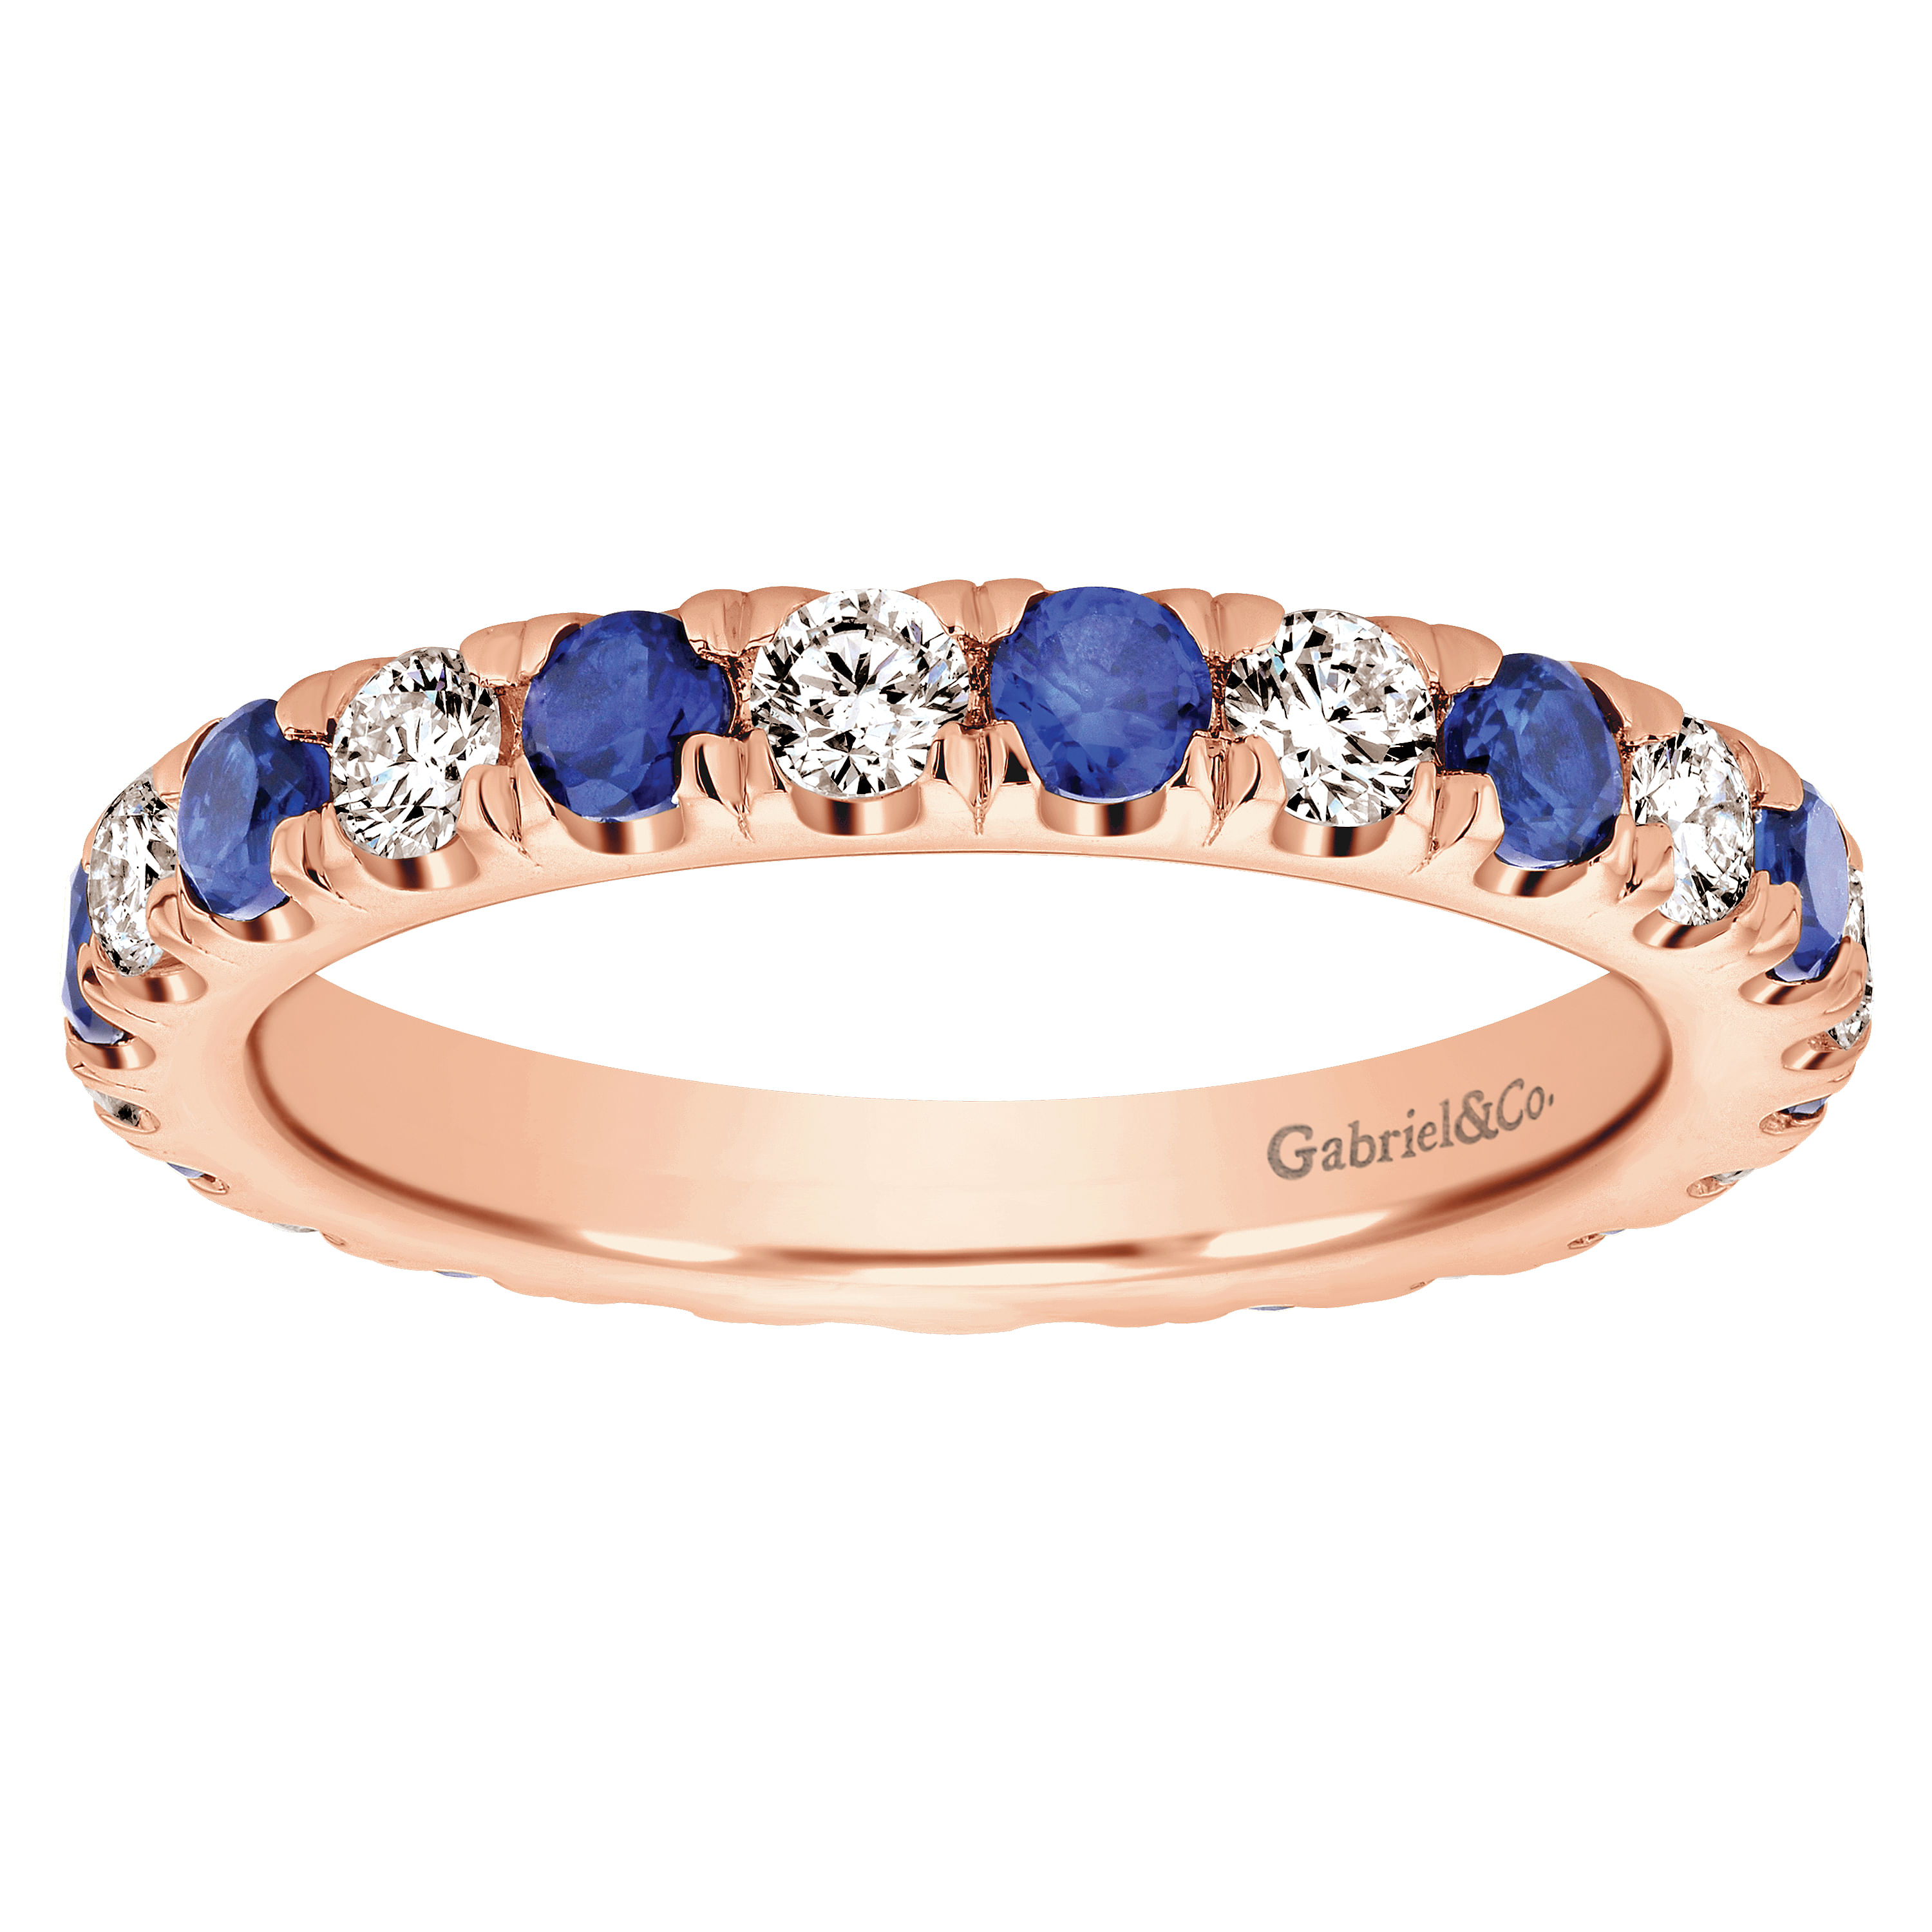 14K Rose Gold French Pavé Set Sapphire and Diamond Eternity Band